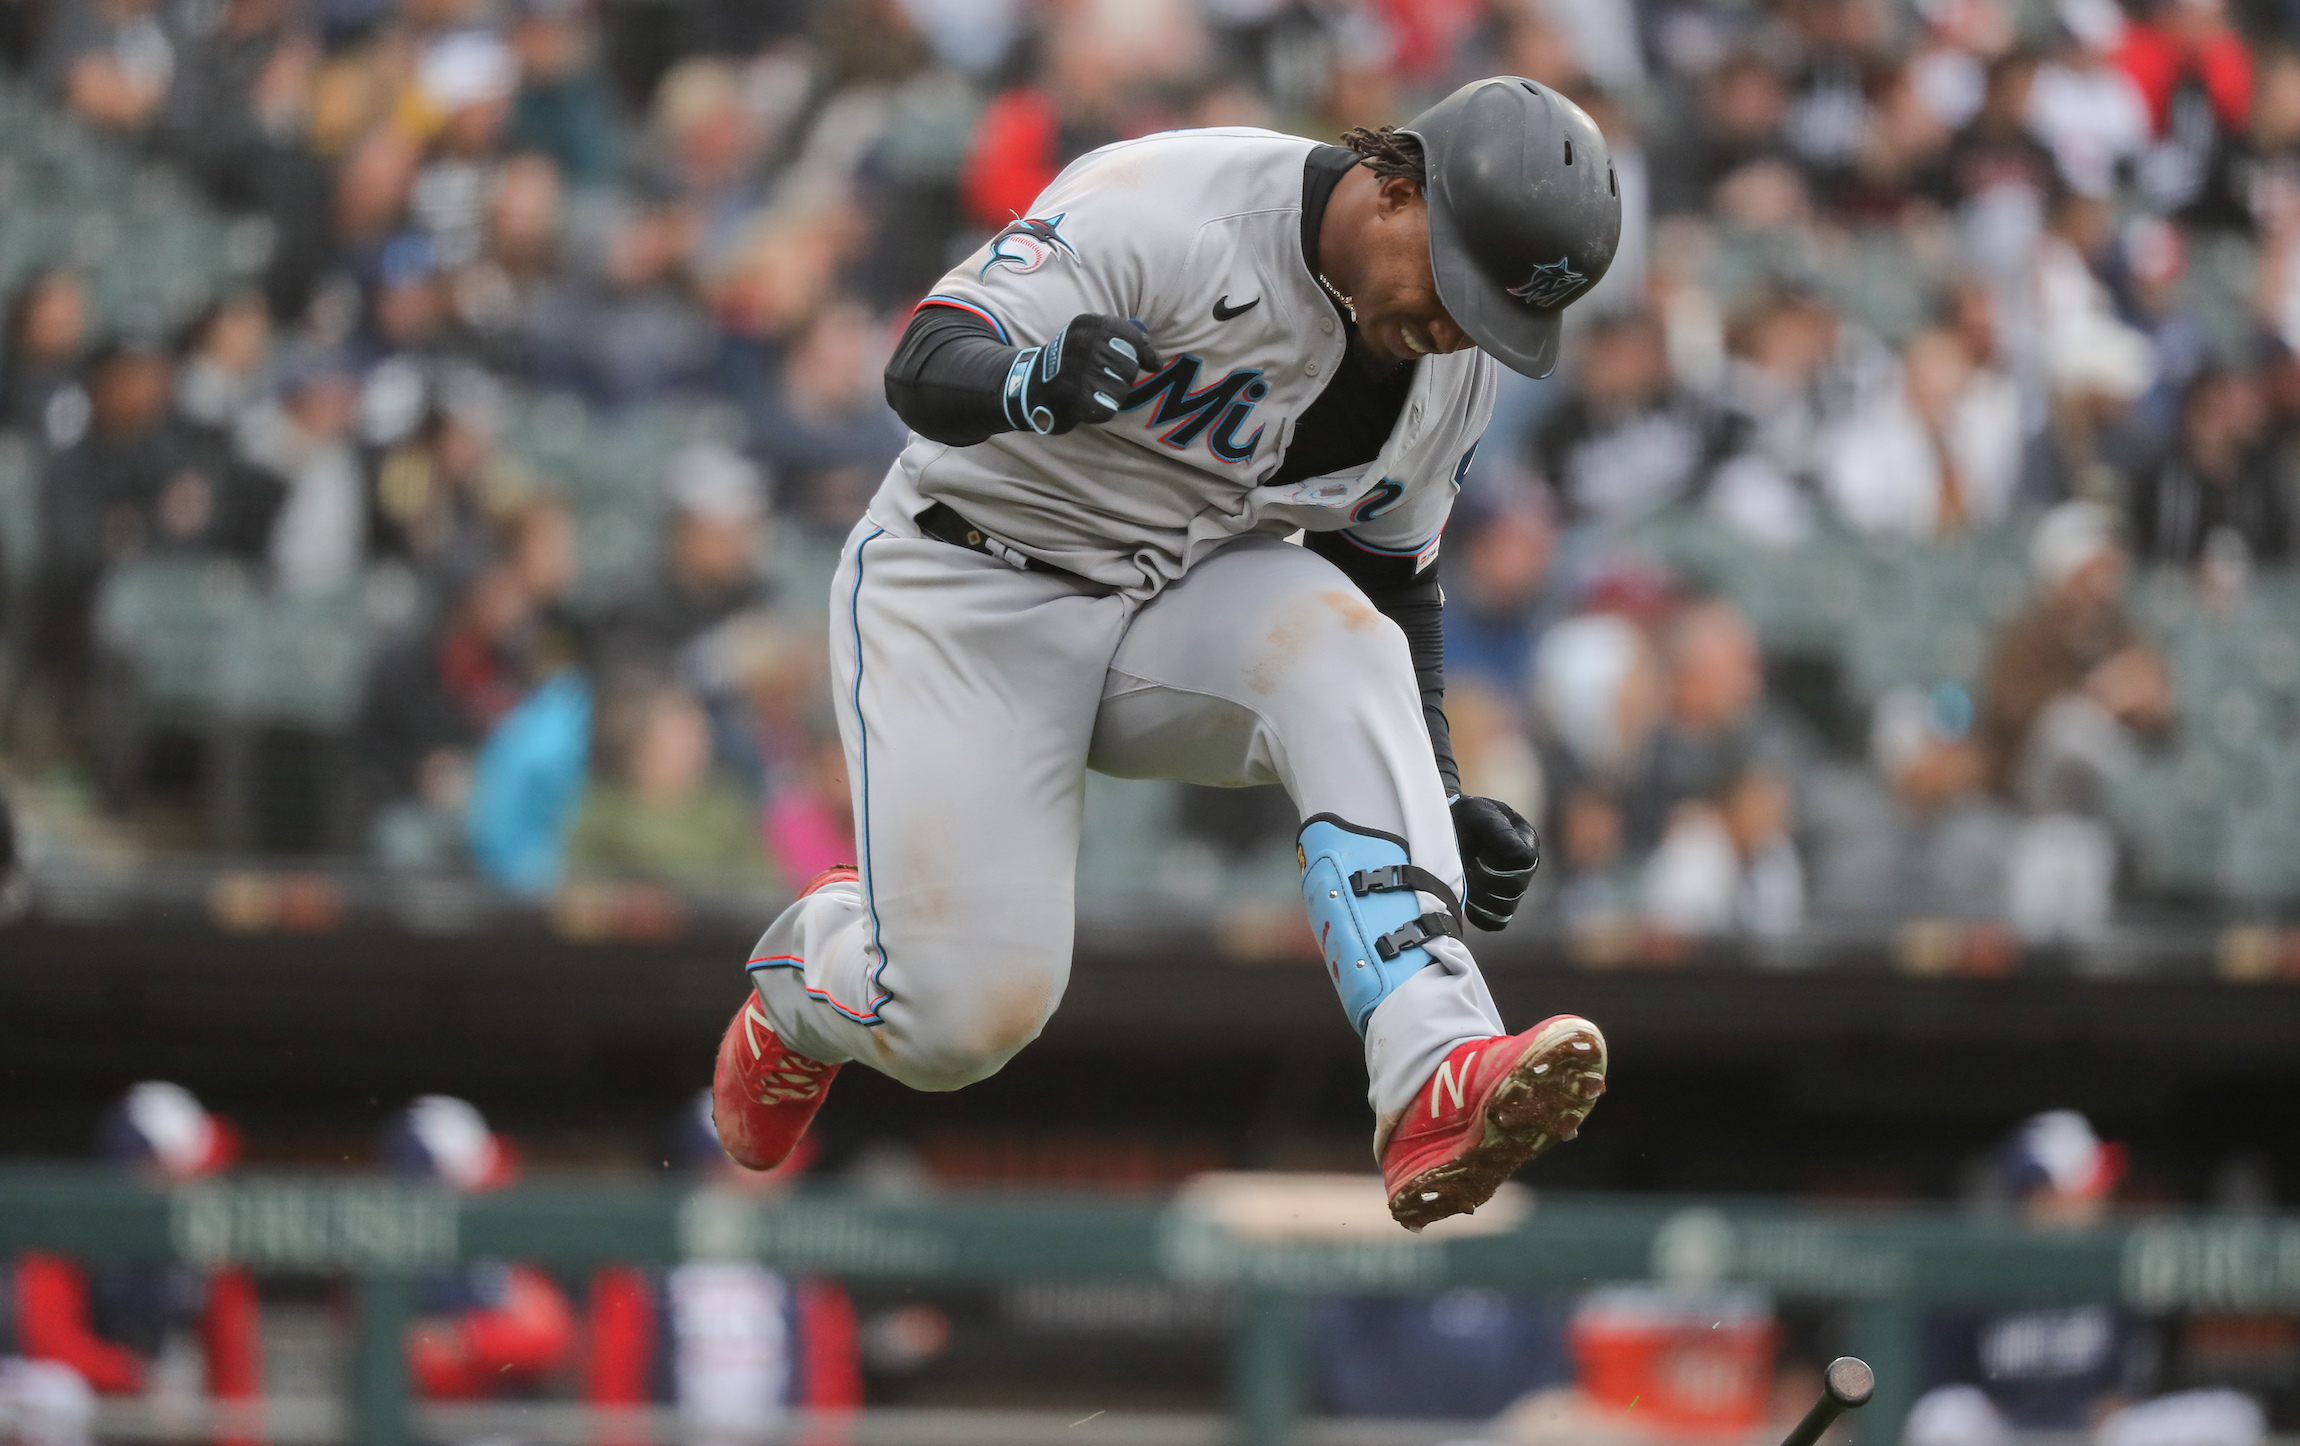 CHICAGO, IL - JUNE 11: Miami Marlins third baseman Jean Segura (9) jumps in the air after hitting a home run in the ninth inning during a Major League Baseball game between the Miami Marlins and the Chicago White Sox on June 11, 2023 at Guaranteed Rate Field in Chicago, IL. (Photo by Melissa Tamez/Icon Sportswire via Getty Images)